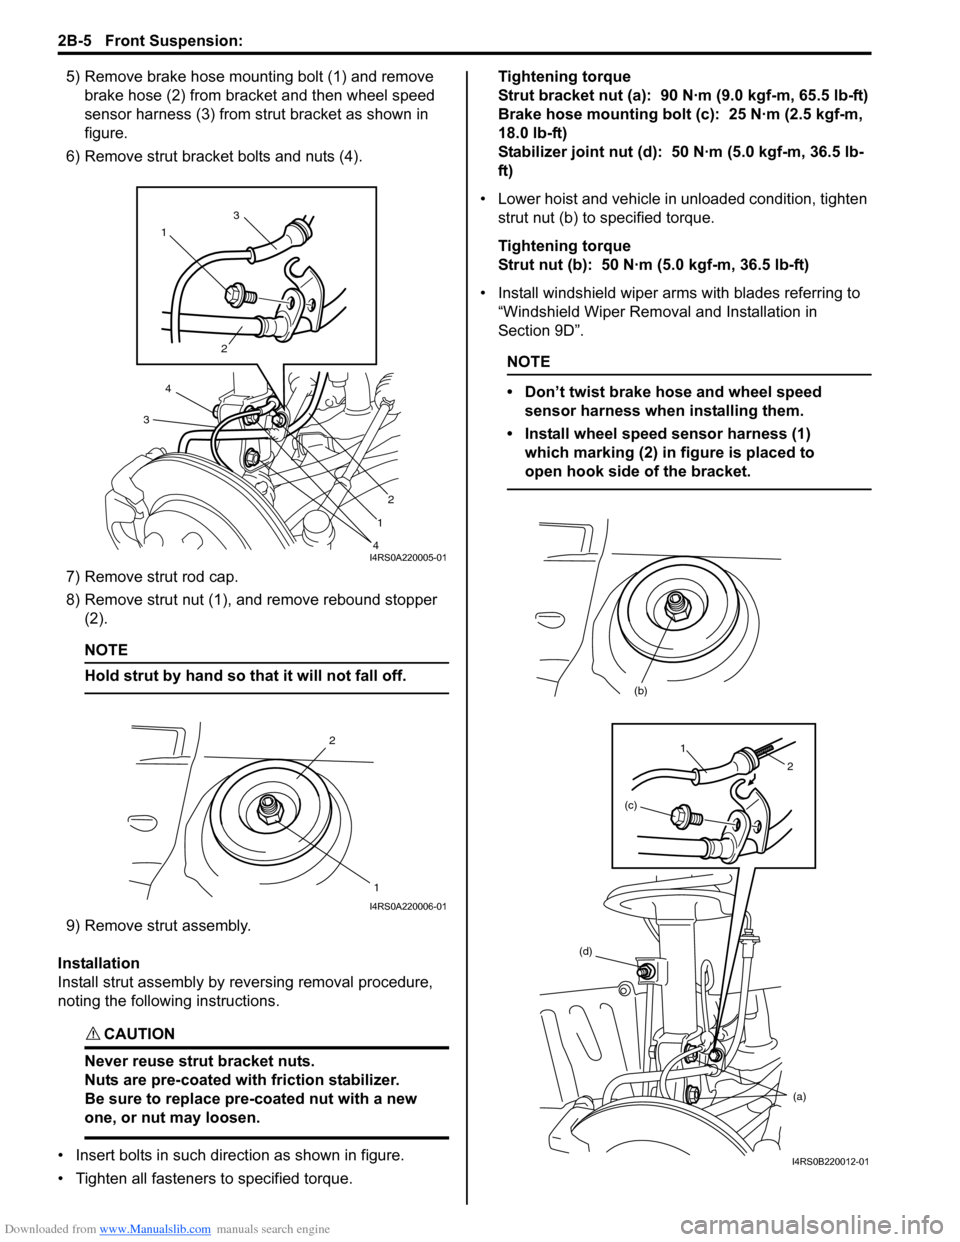 SUZUKI SWIFT 2008 2.G Service User Guide Downloaded from www.Manualslib.com manuals search engine 2B-5 Front Suspension: 
5) Remove brake hose mounting bolt (1) and remove brake hose (2) from bracket and then wheel speed 
sensor harness (3) 